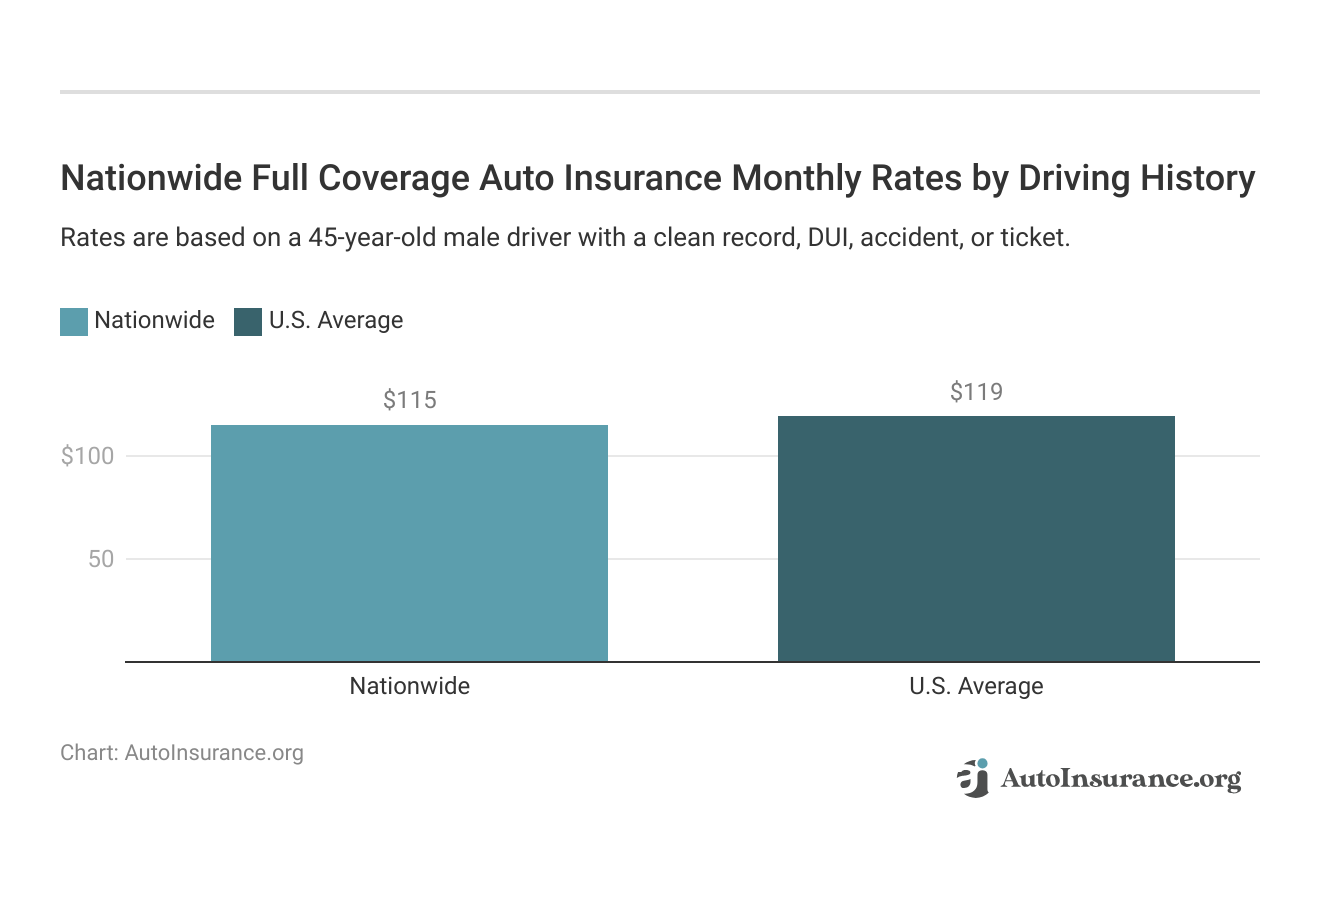 <h3>Nationwide Full Coverage Auto Insurance Monthly Rates by Driving History</h3>